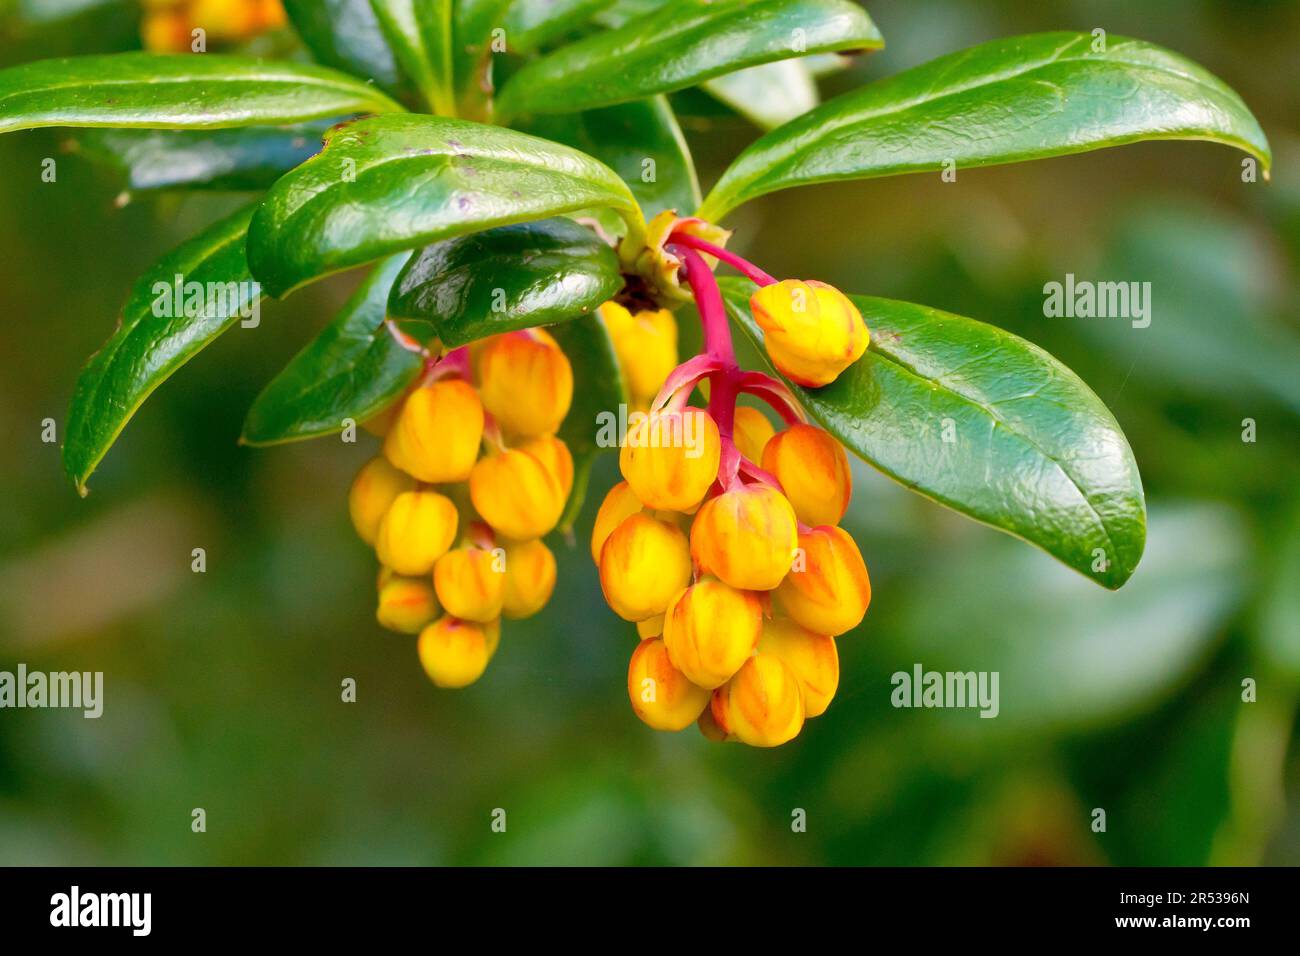 Darwin's Barberry (berberis darwinii), close up of the orange flowerbuds of the ornamental shrub planted in gardens and often naturalised in the wild. Stock Photo